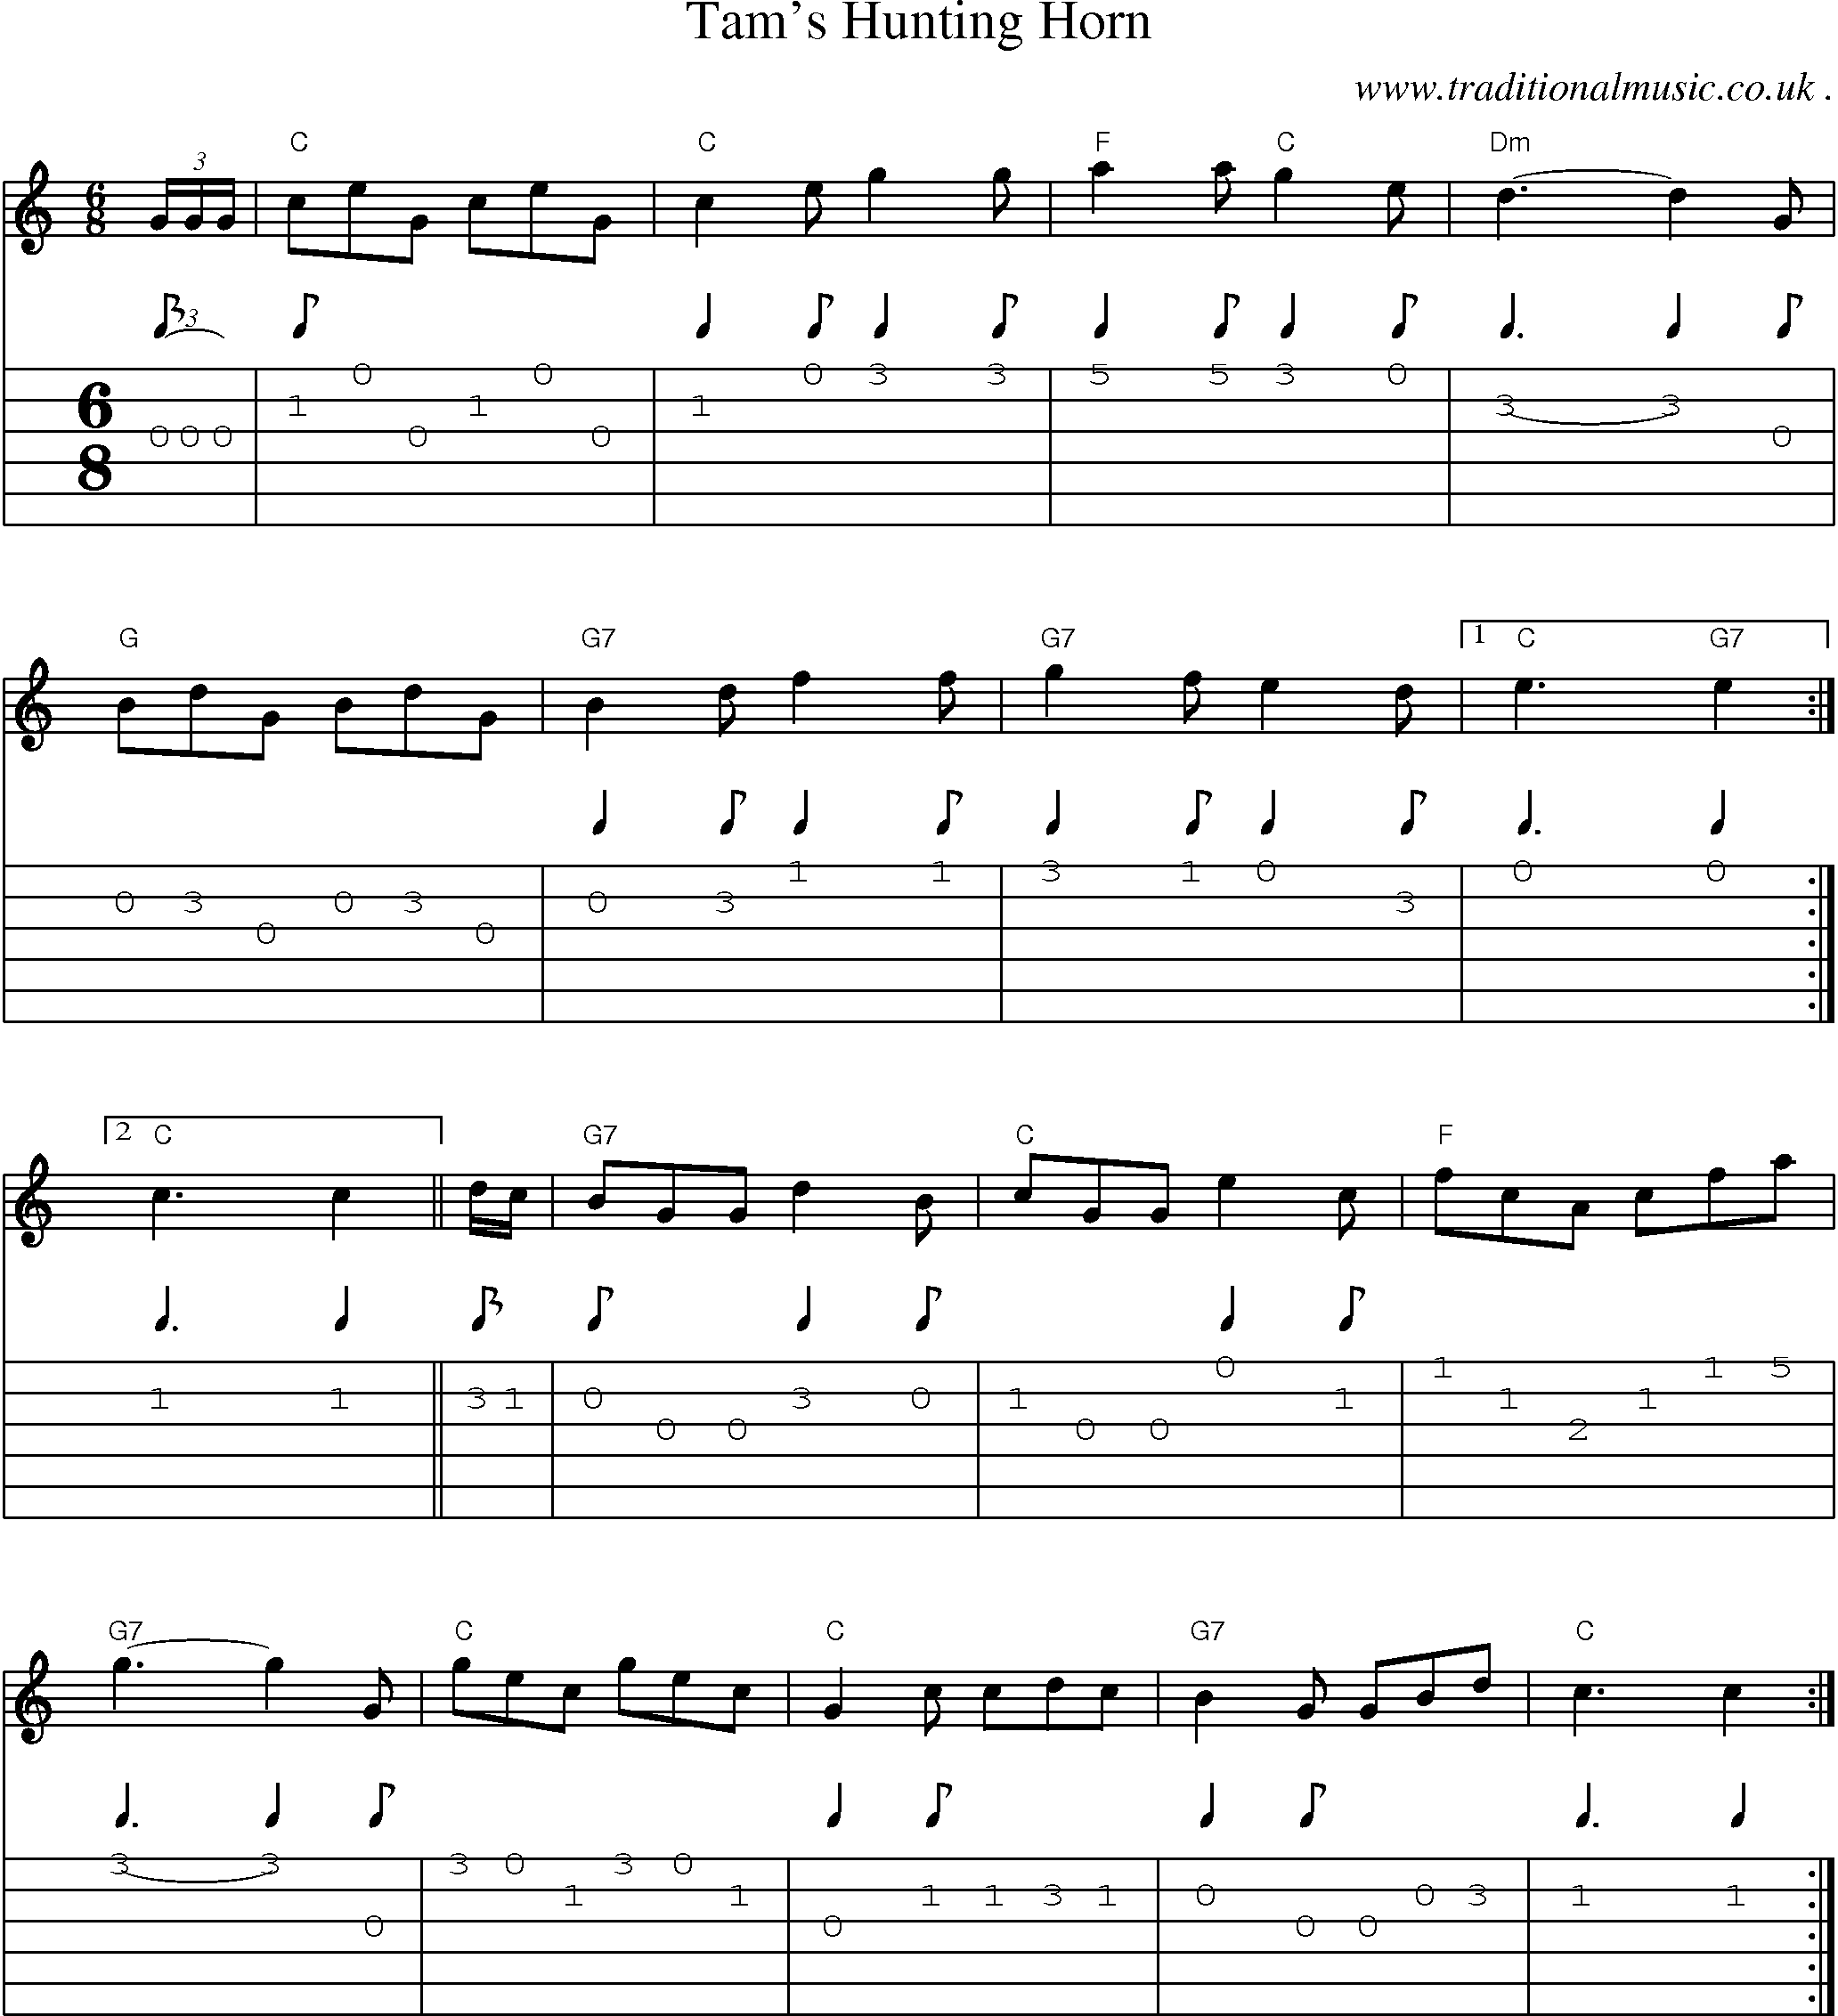 Sheet-Music and Guitar Tabs for Tams Hunting Horn